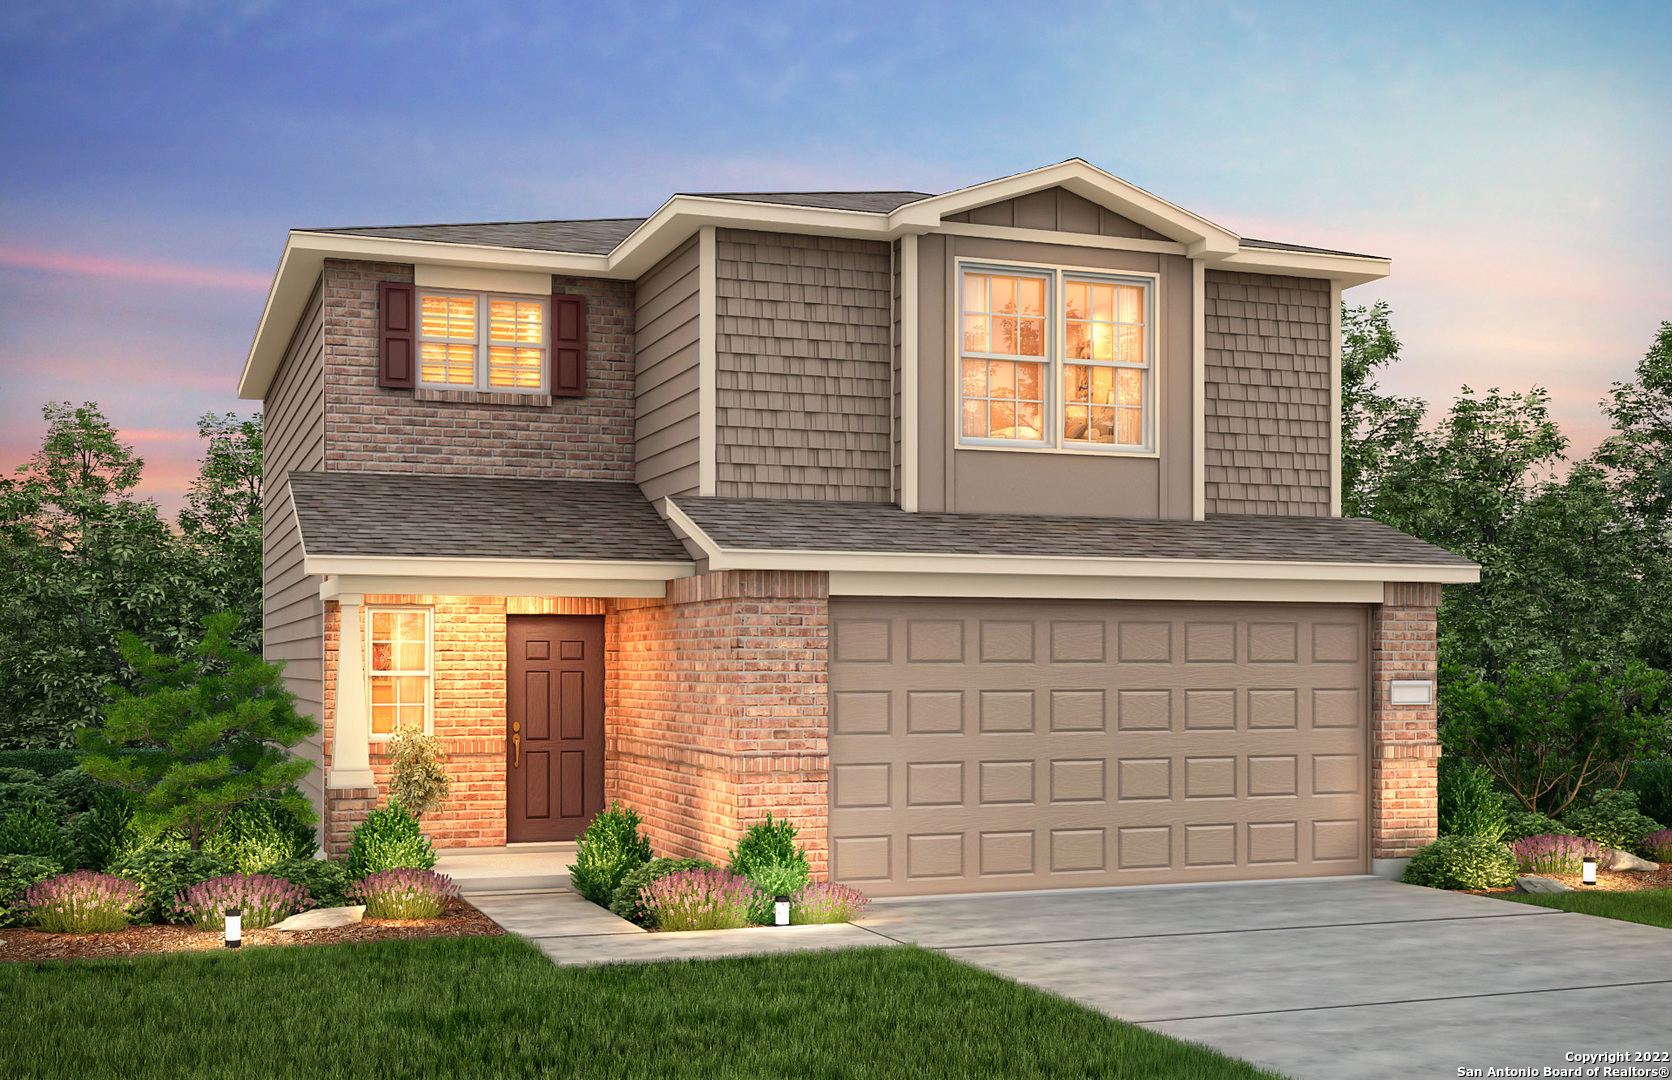 Ideal for family living and entertaining, the Lincoln offers a spacious kitchen, downstairs guest room, and a second floor game room.